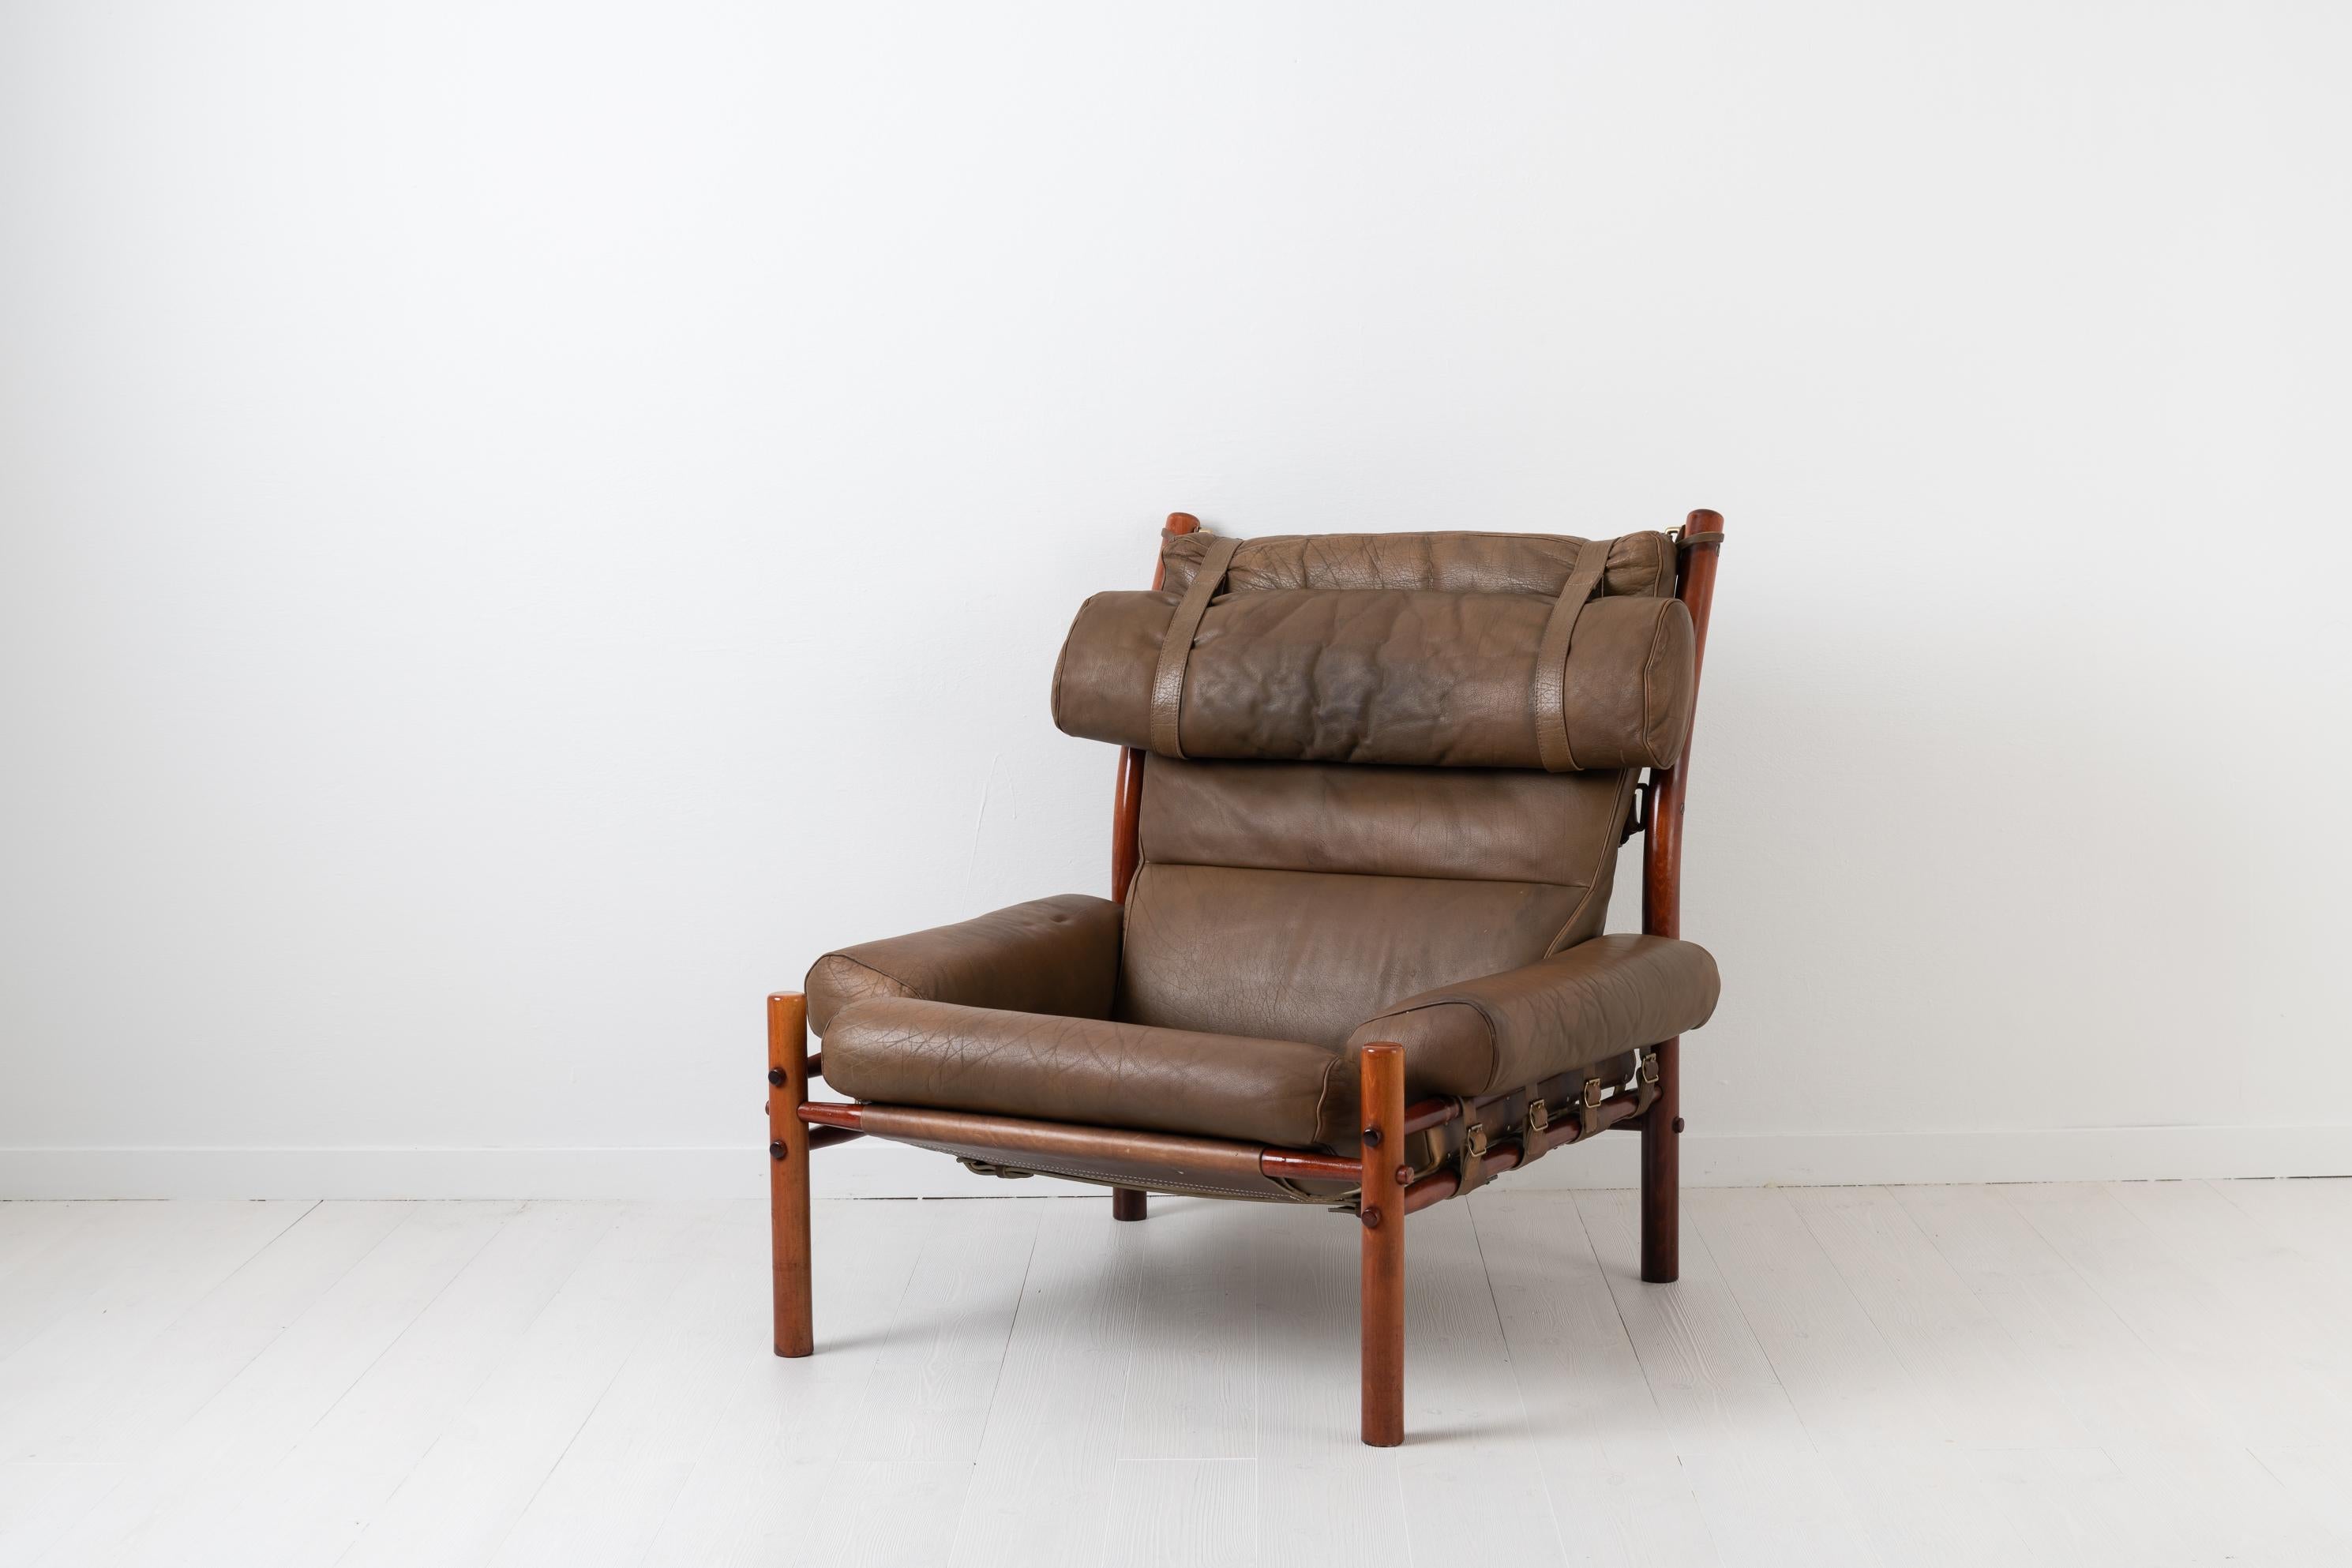 Scandinavian Modern lounge chair Inca by Swedish designer Arne Norell. Made during the 1960s by hand by Norell Möbler AB in their factory in Småland with exclusive Scandinavian leather and hardwood. The frame is held together by leather straps -